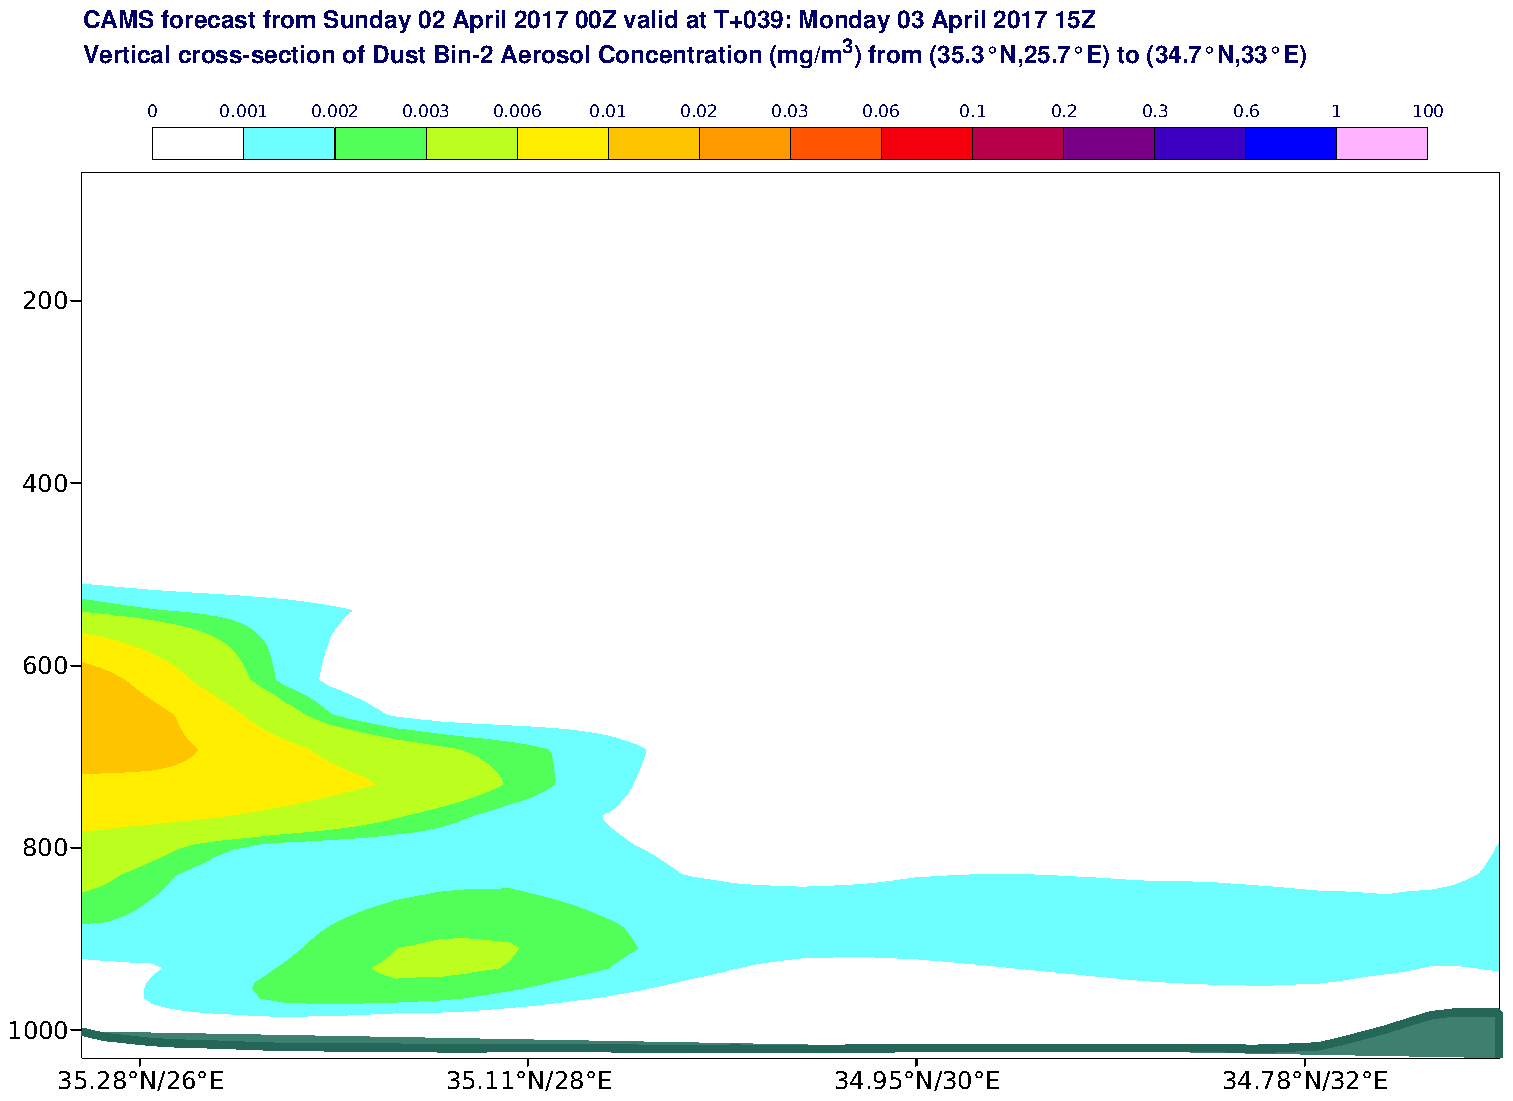 Vertical cross-section of Dust Bin-2 Aerosol Concentration (mg/m3) valid at T39 - 2017-04-03 15:00